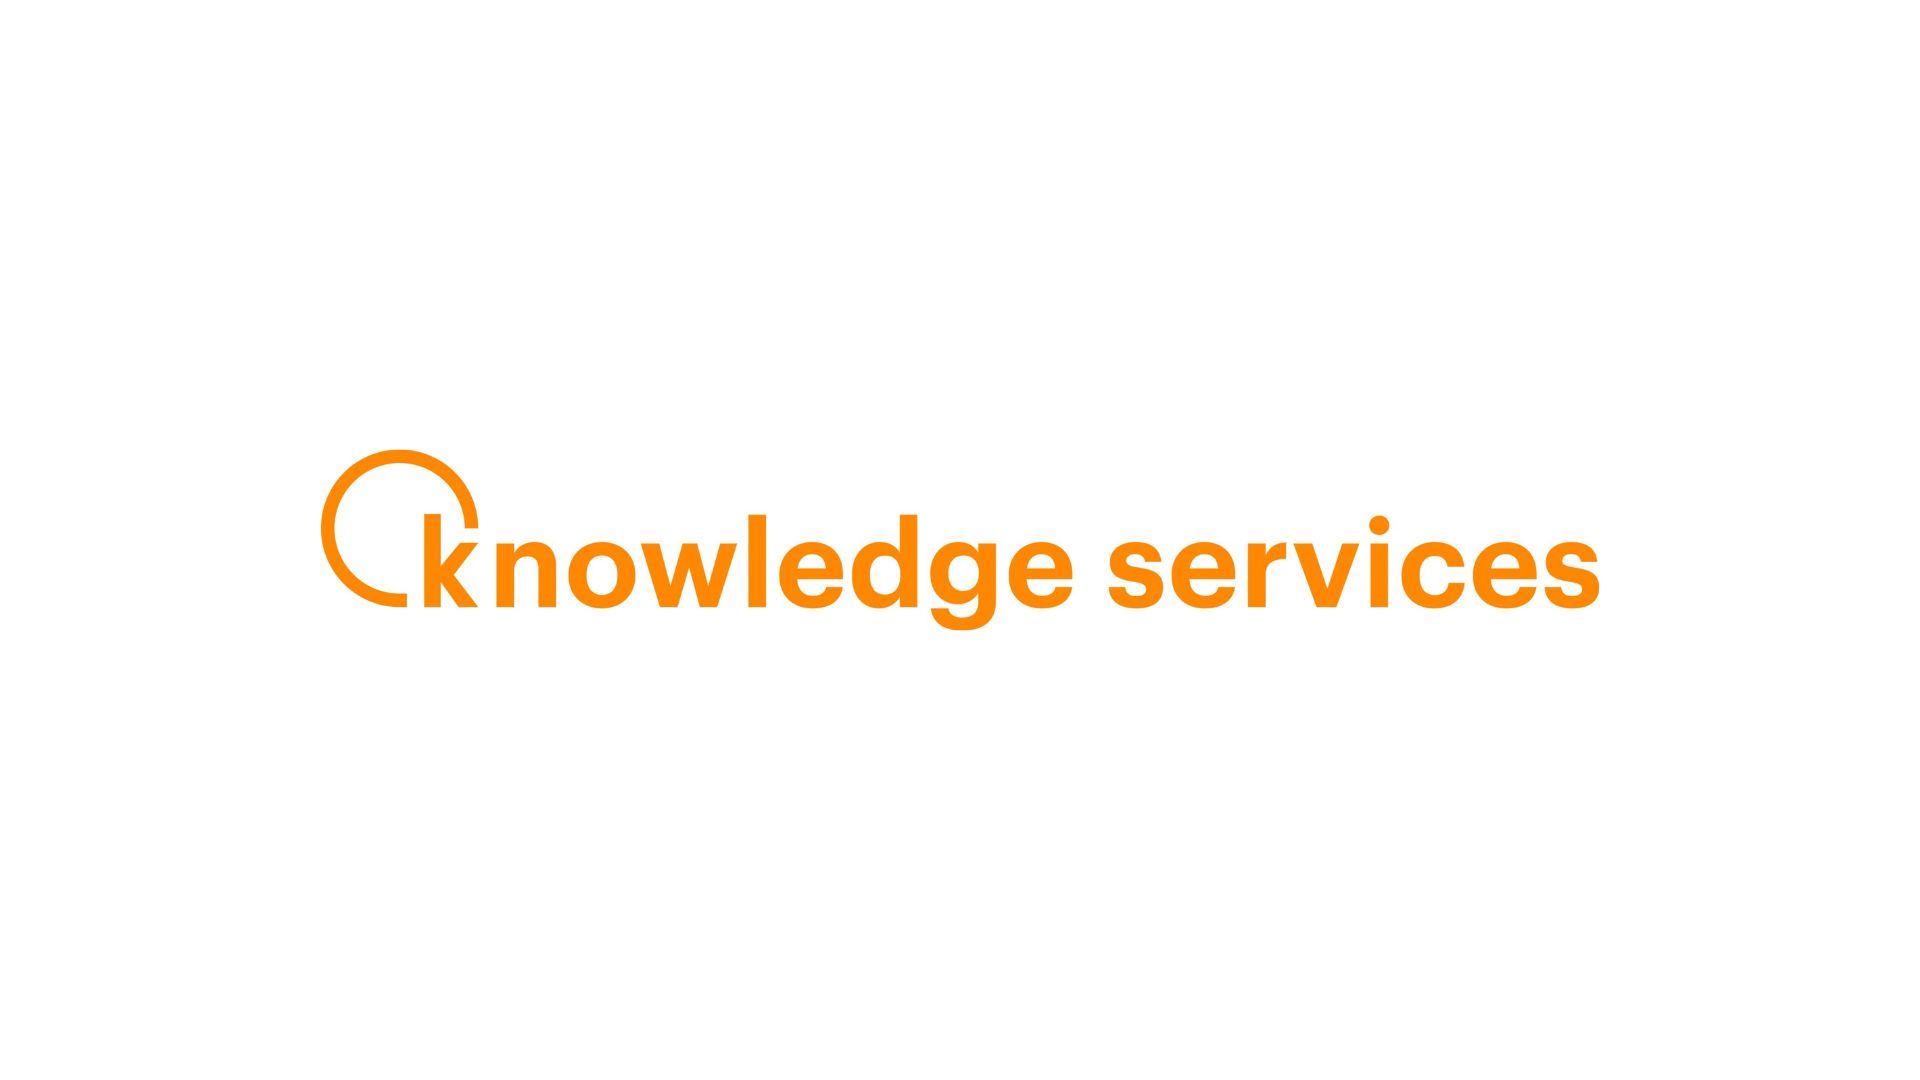 Knowledge Services